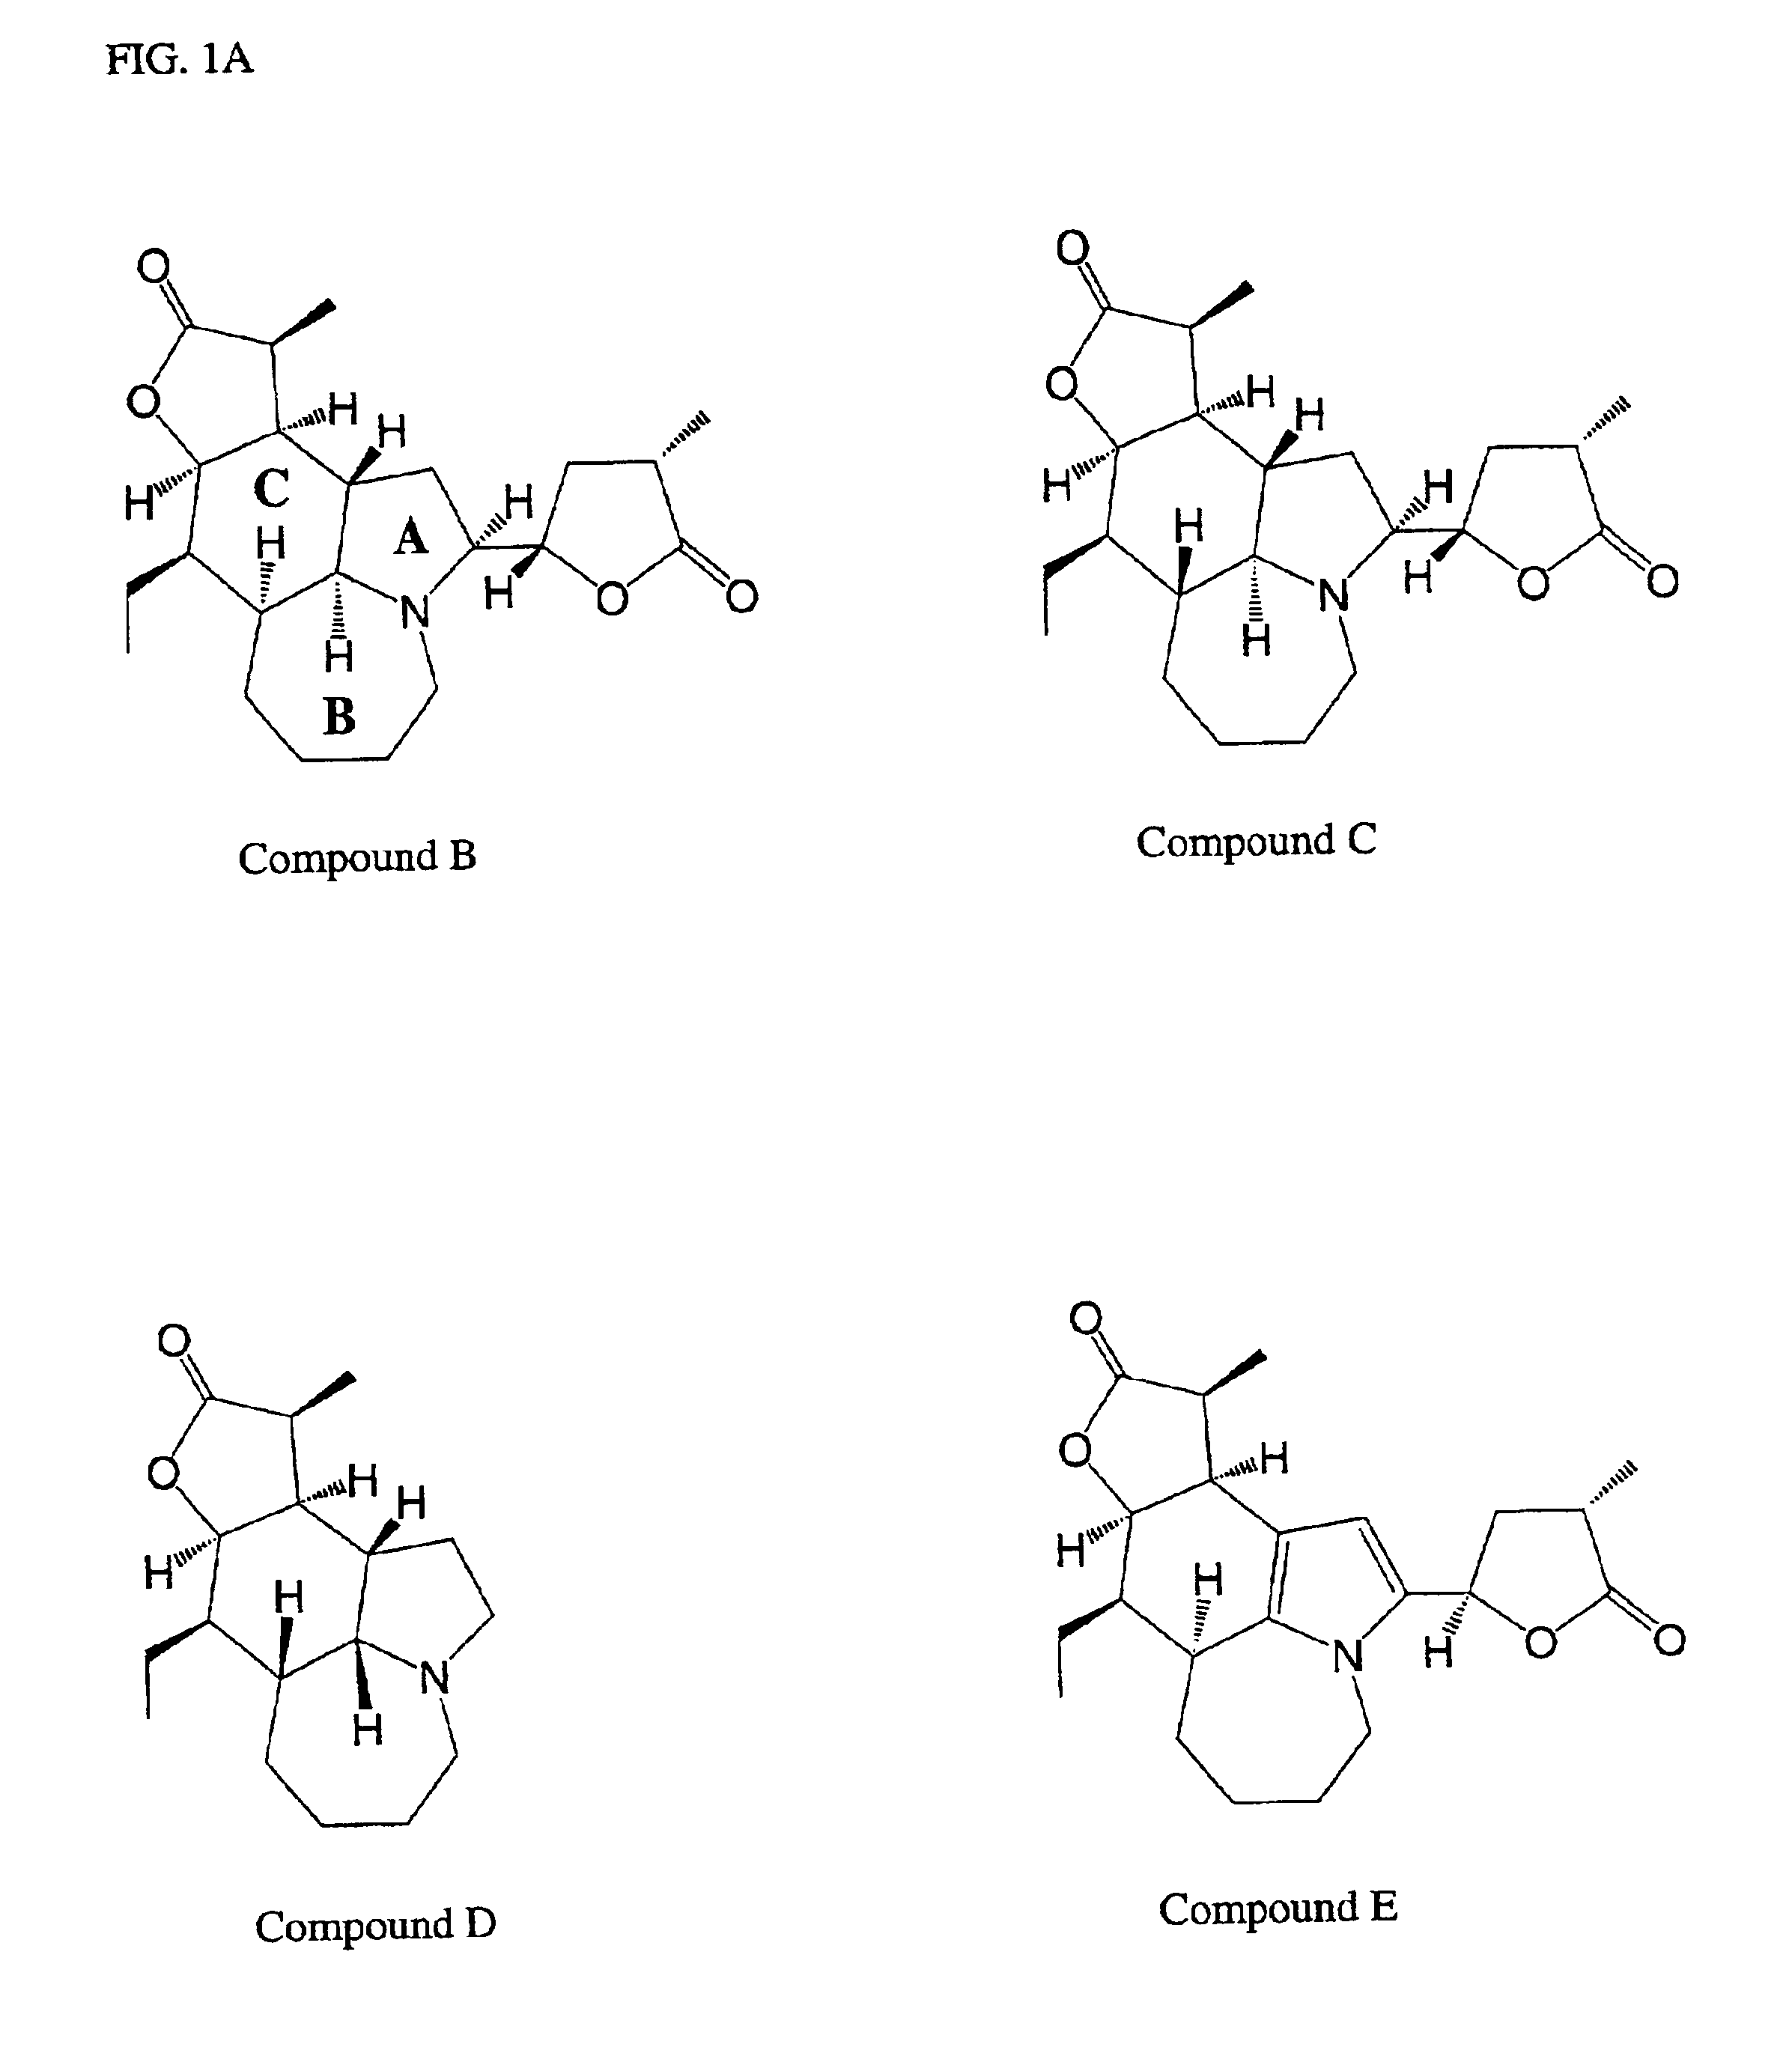 Plant extracts and alkaloids having antitussive activity